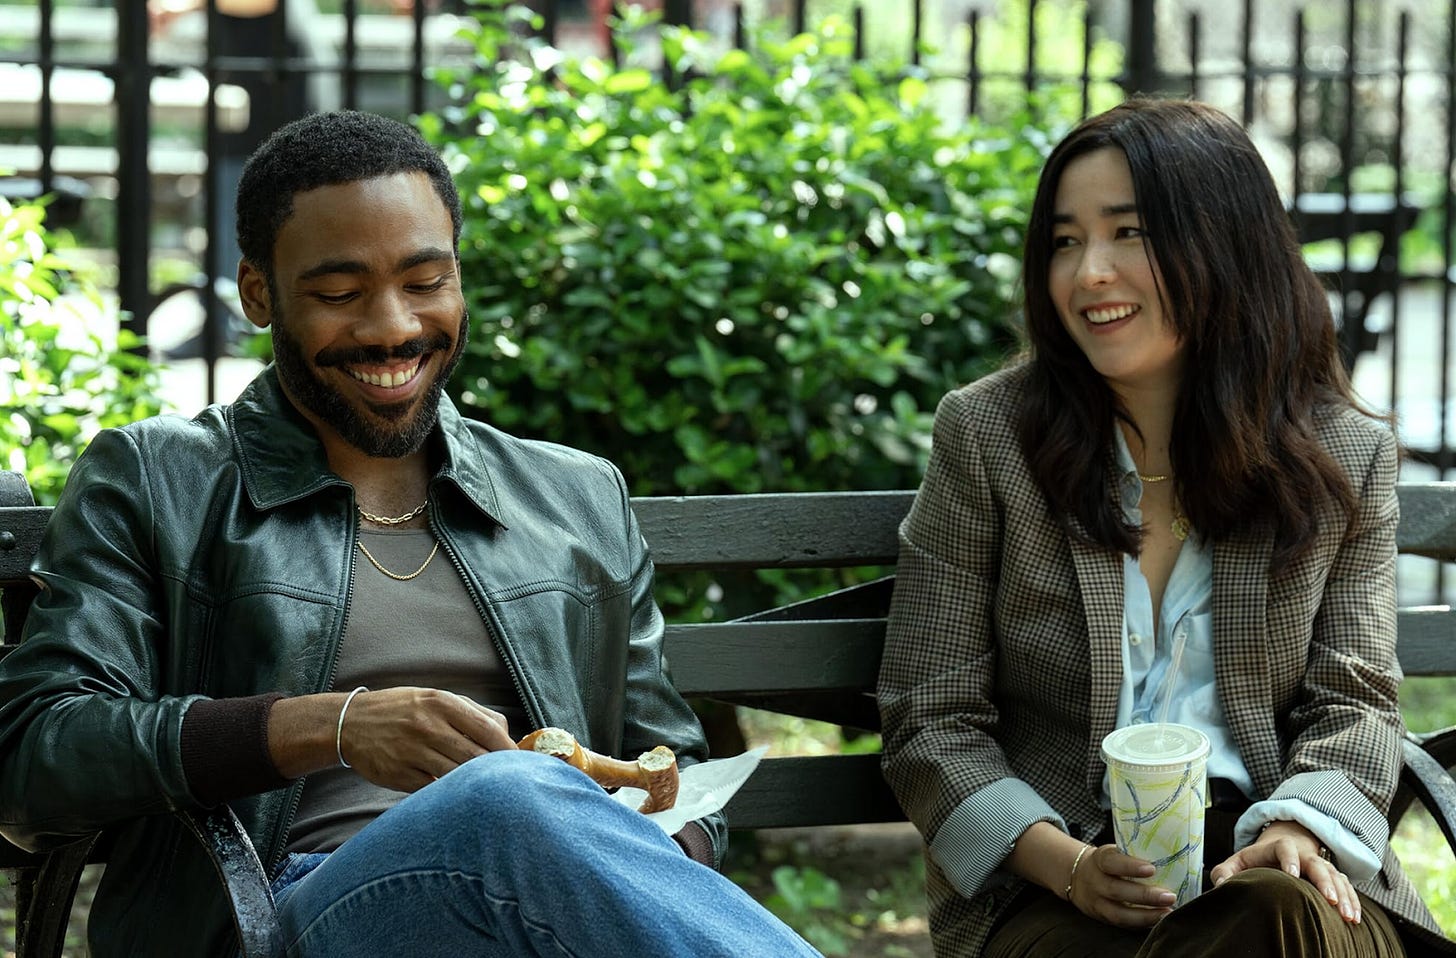 Donald Glover and Maya Erskine as John and Jane Smith, sitting on a park bench together, smiling